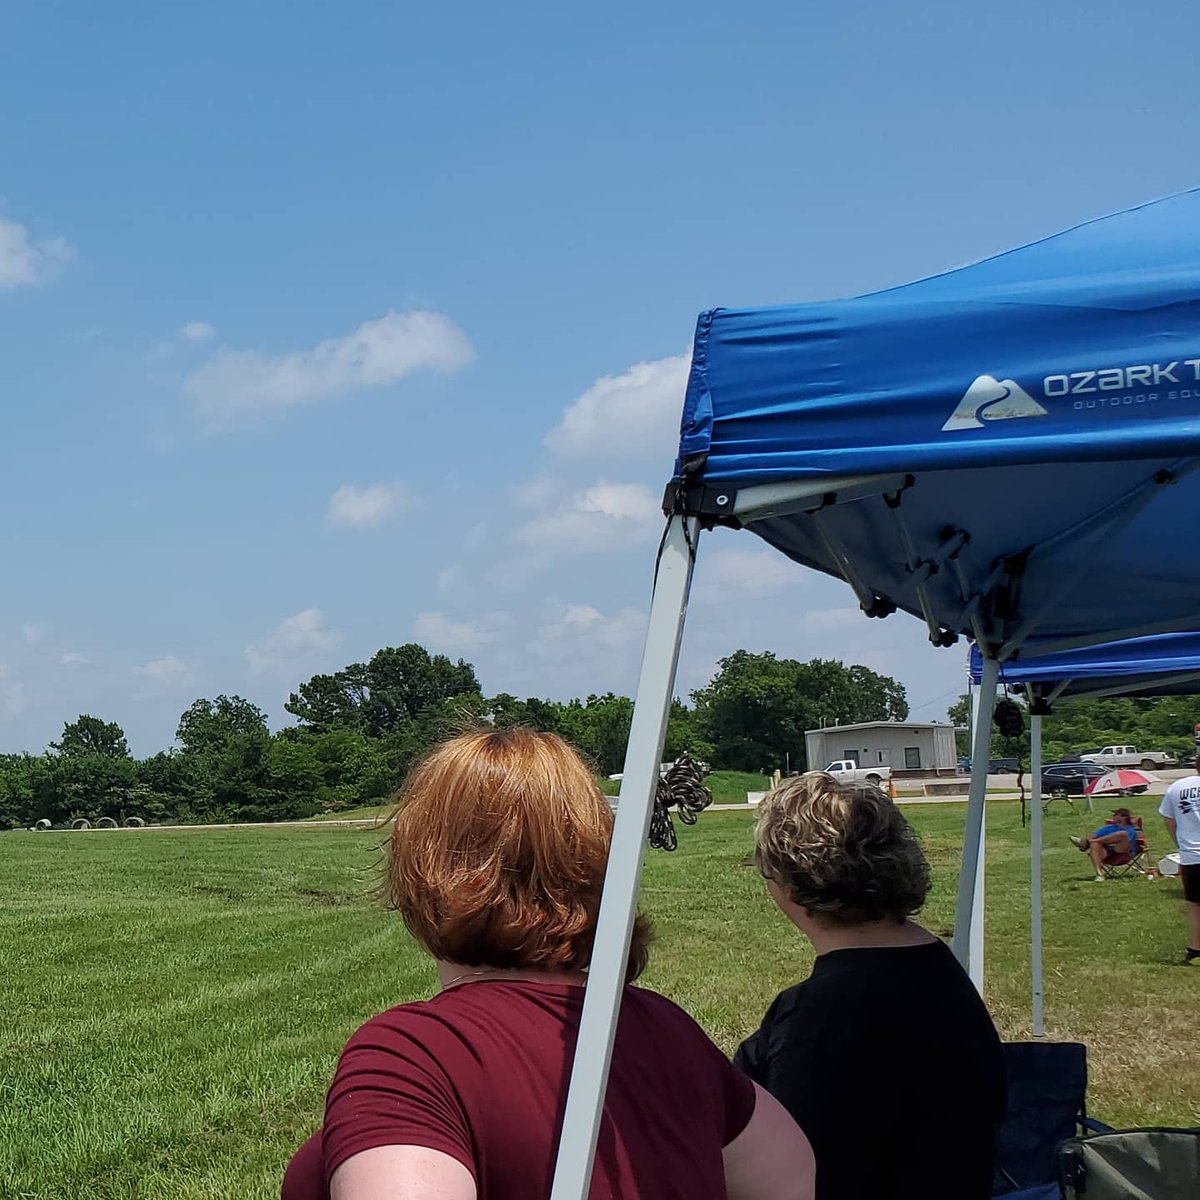 One of the benefits of the regional flyoff locations is having a larger support group coming to cheer us on this year. Thank you #lincolnrocketry parents! 🚀 However, we are looking forward to traveling back to Rockets on the Hill and the Great Meadow for #tarc22 #rocketcontest